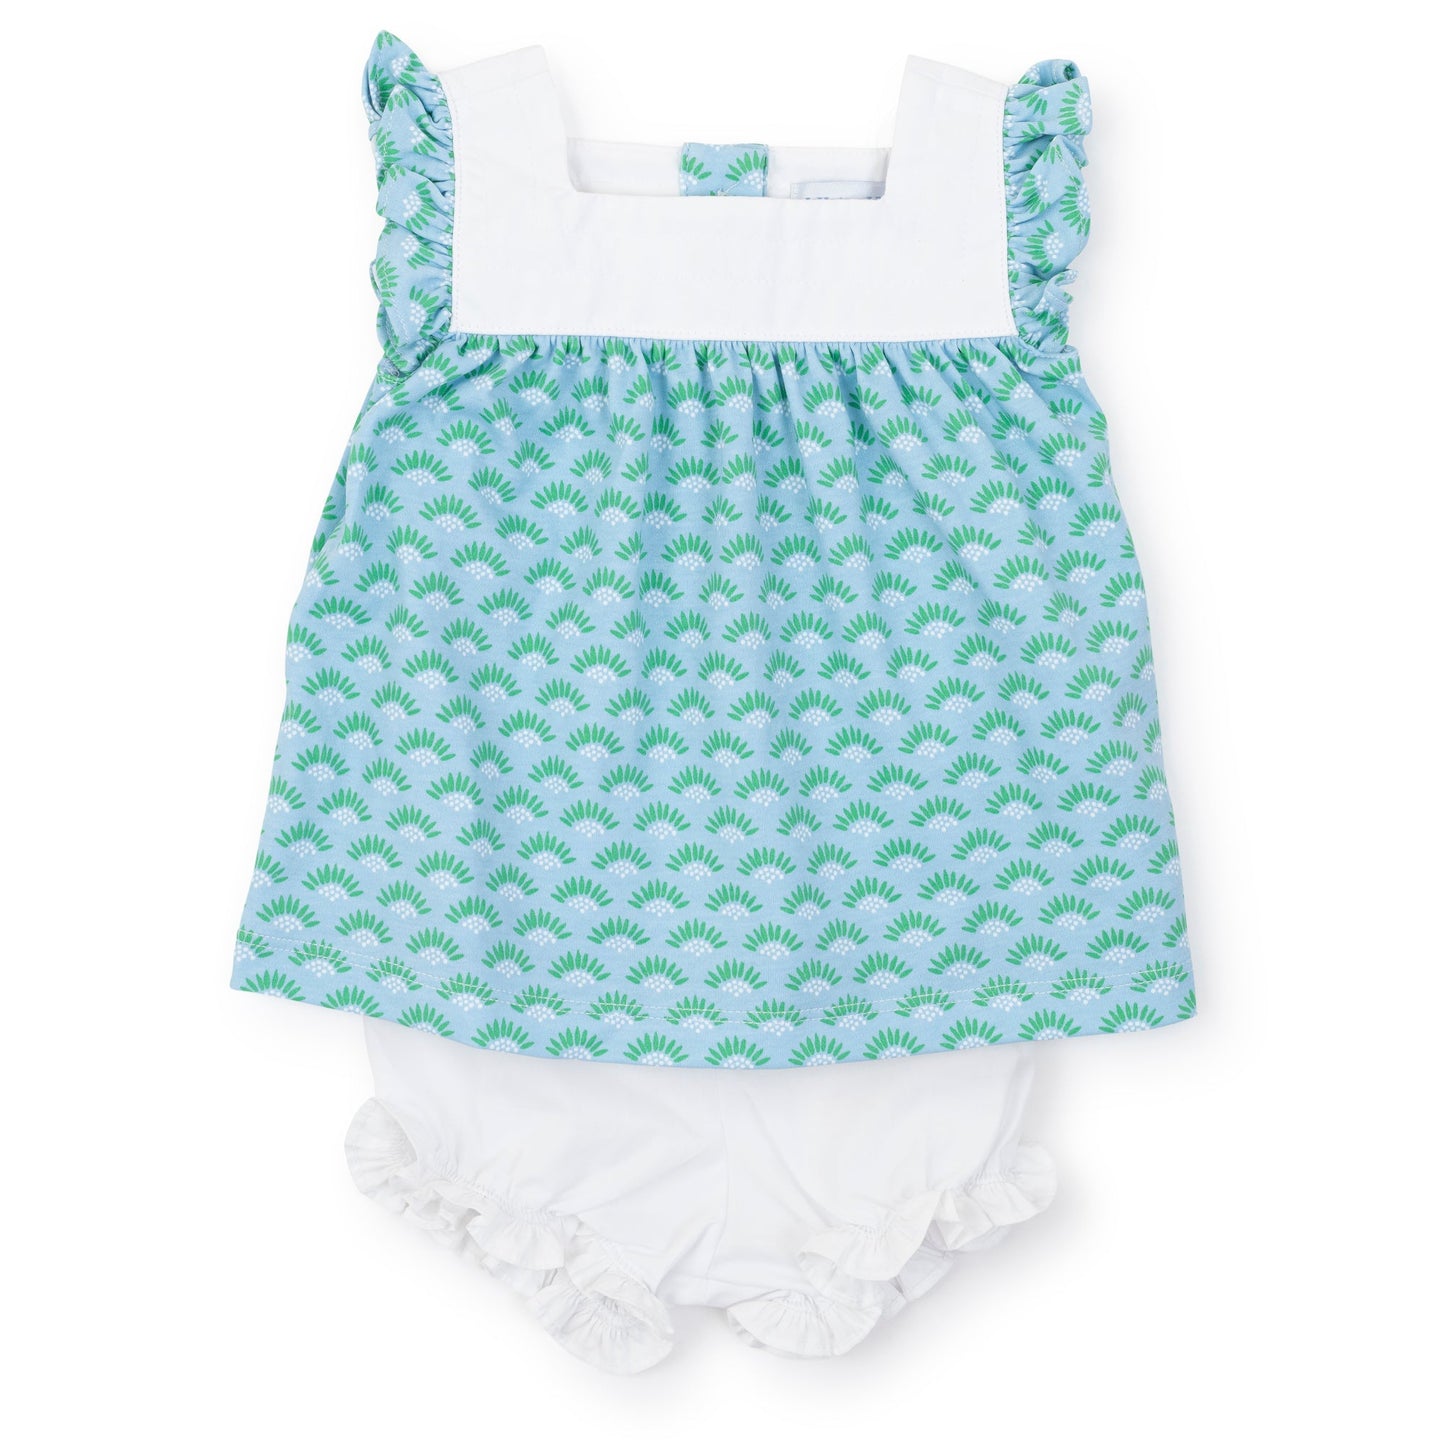 Lila and Hayes Annie Girls' Pima Cotton Bloomer Set - Cool Blooms